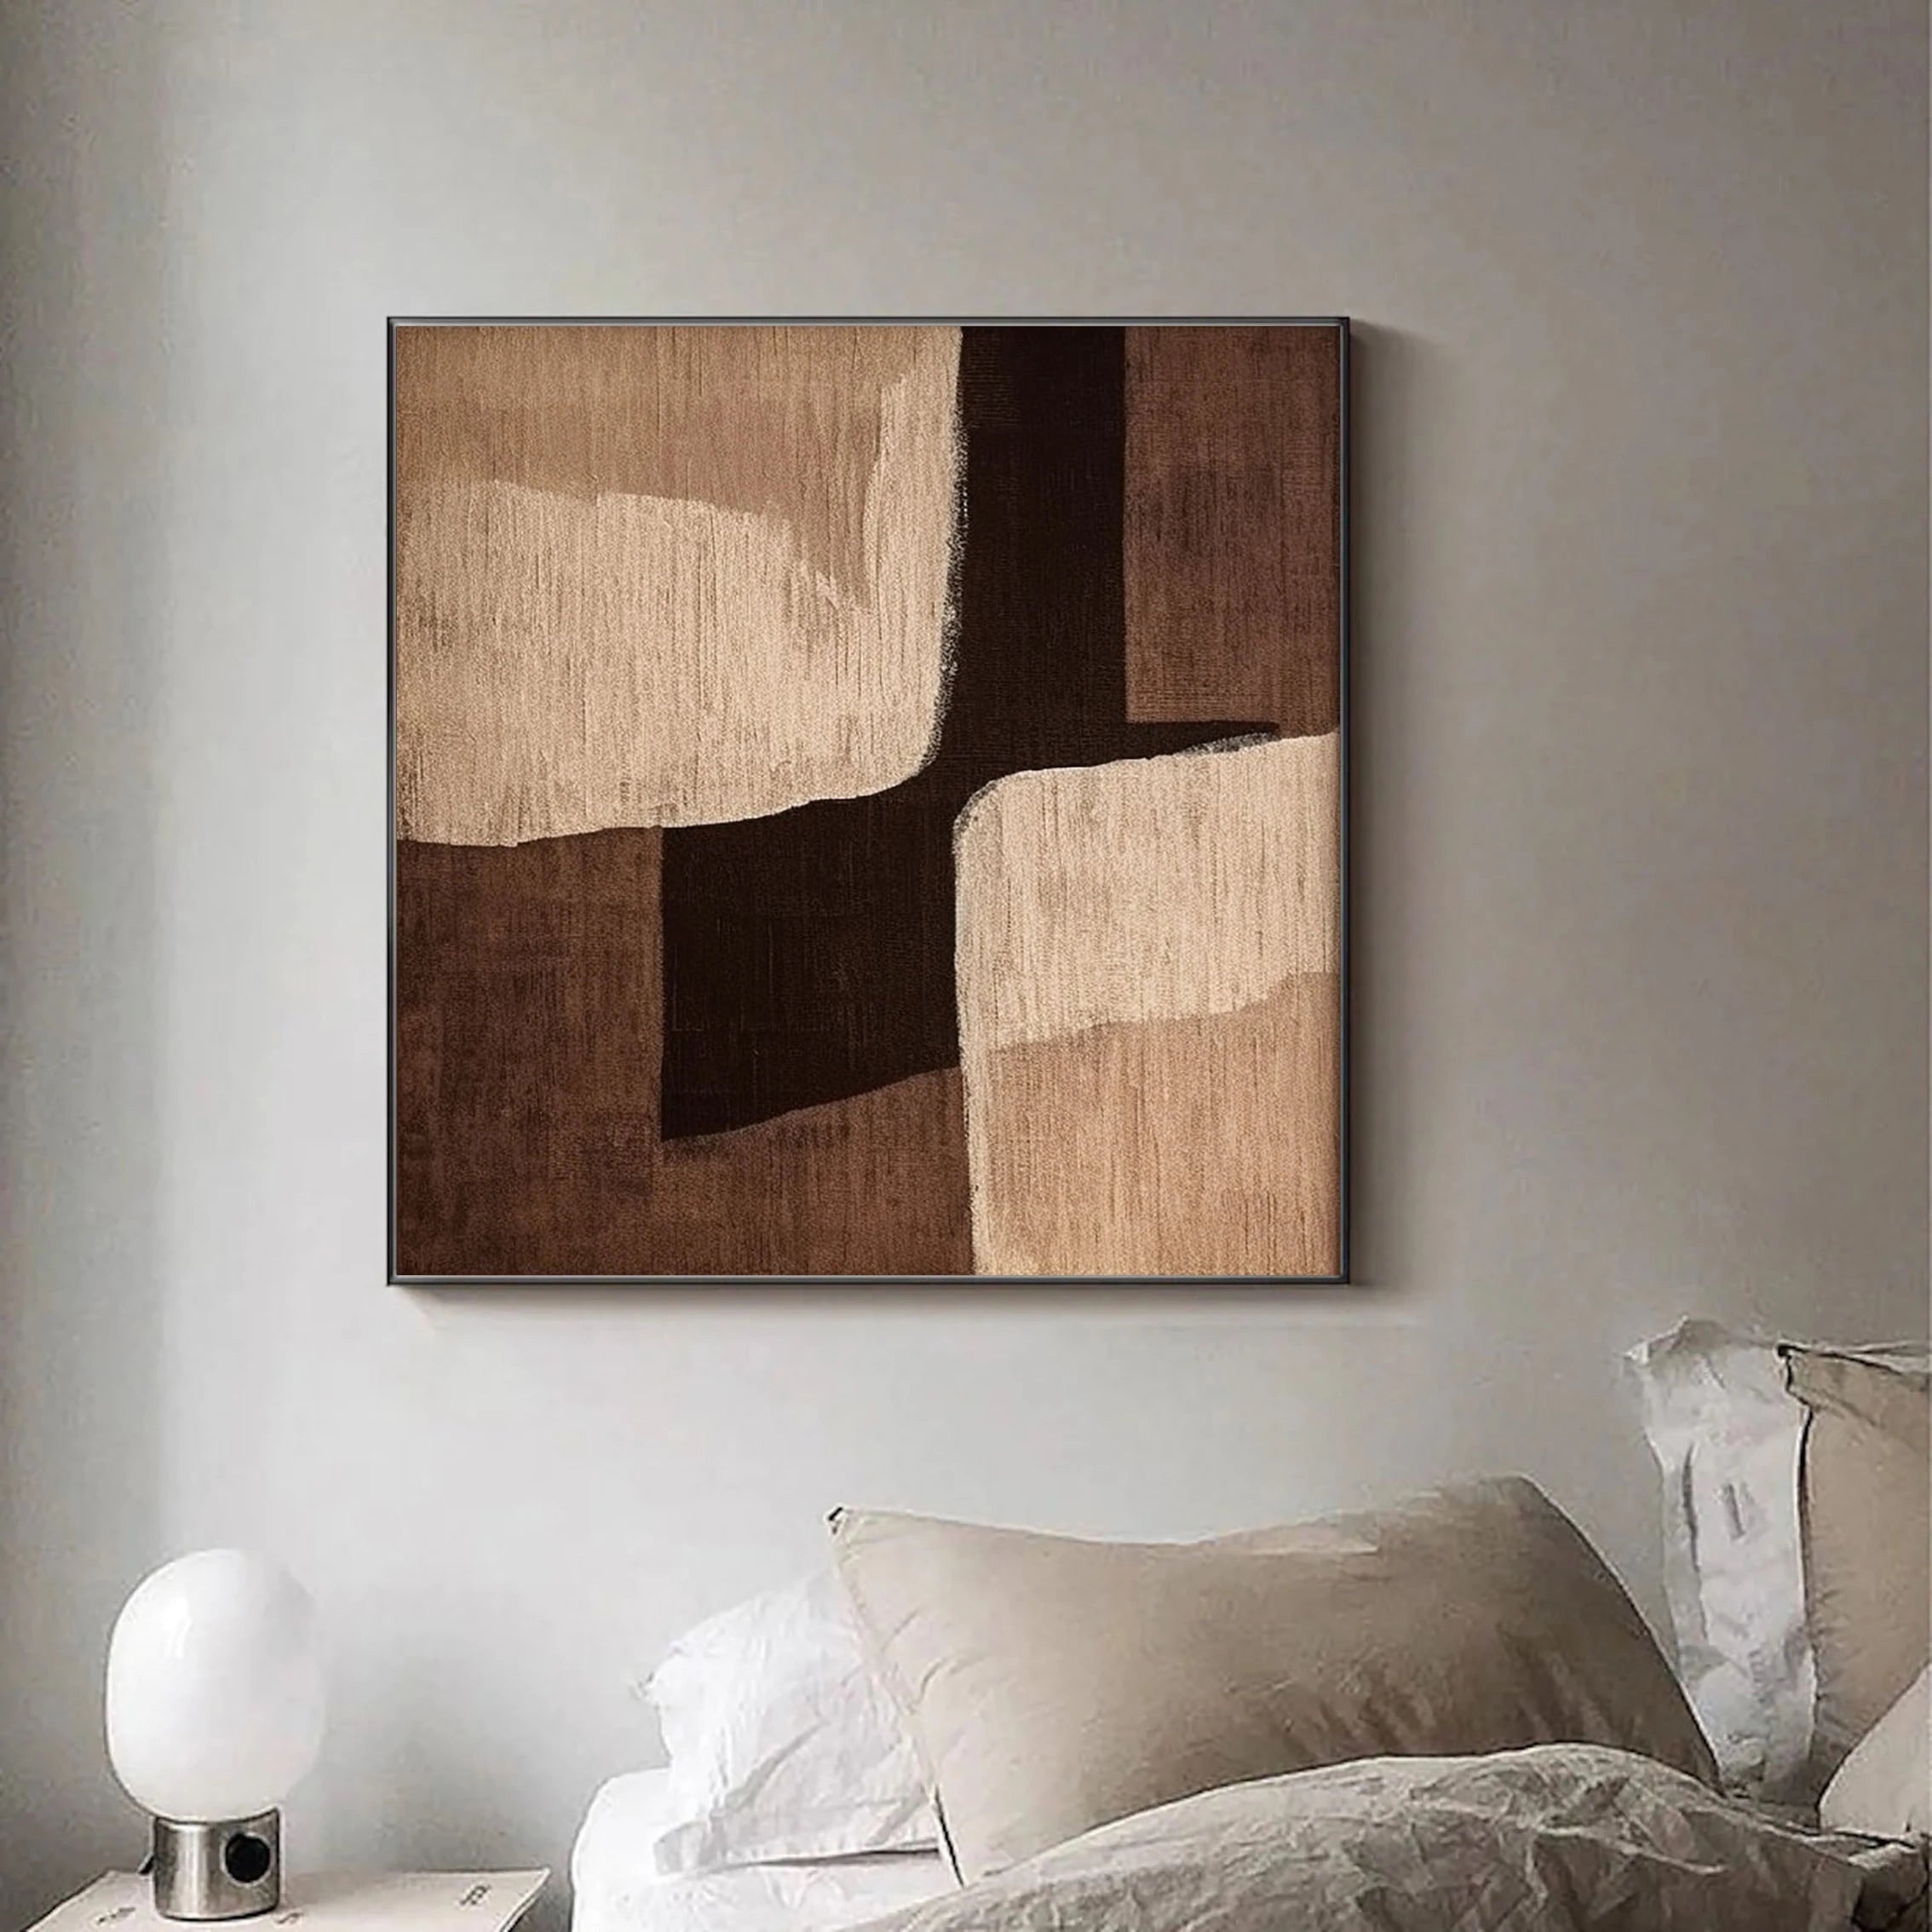 Eleanos Gallery Original Large Abstract Wabi Sabi Brown Painting Wall Decor for Living Room